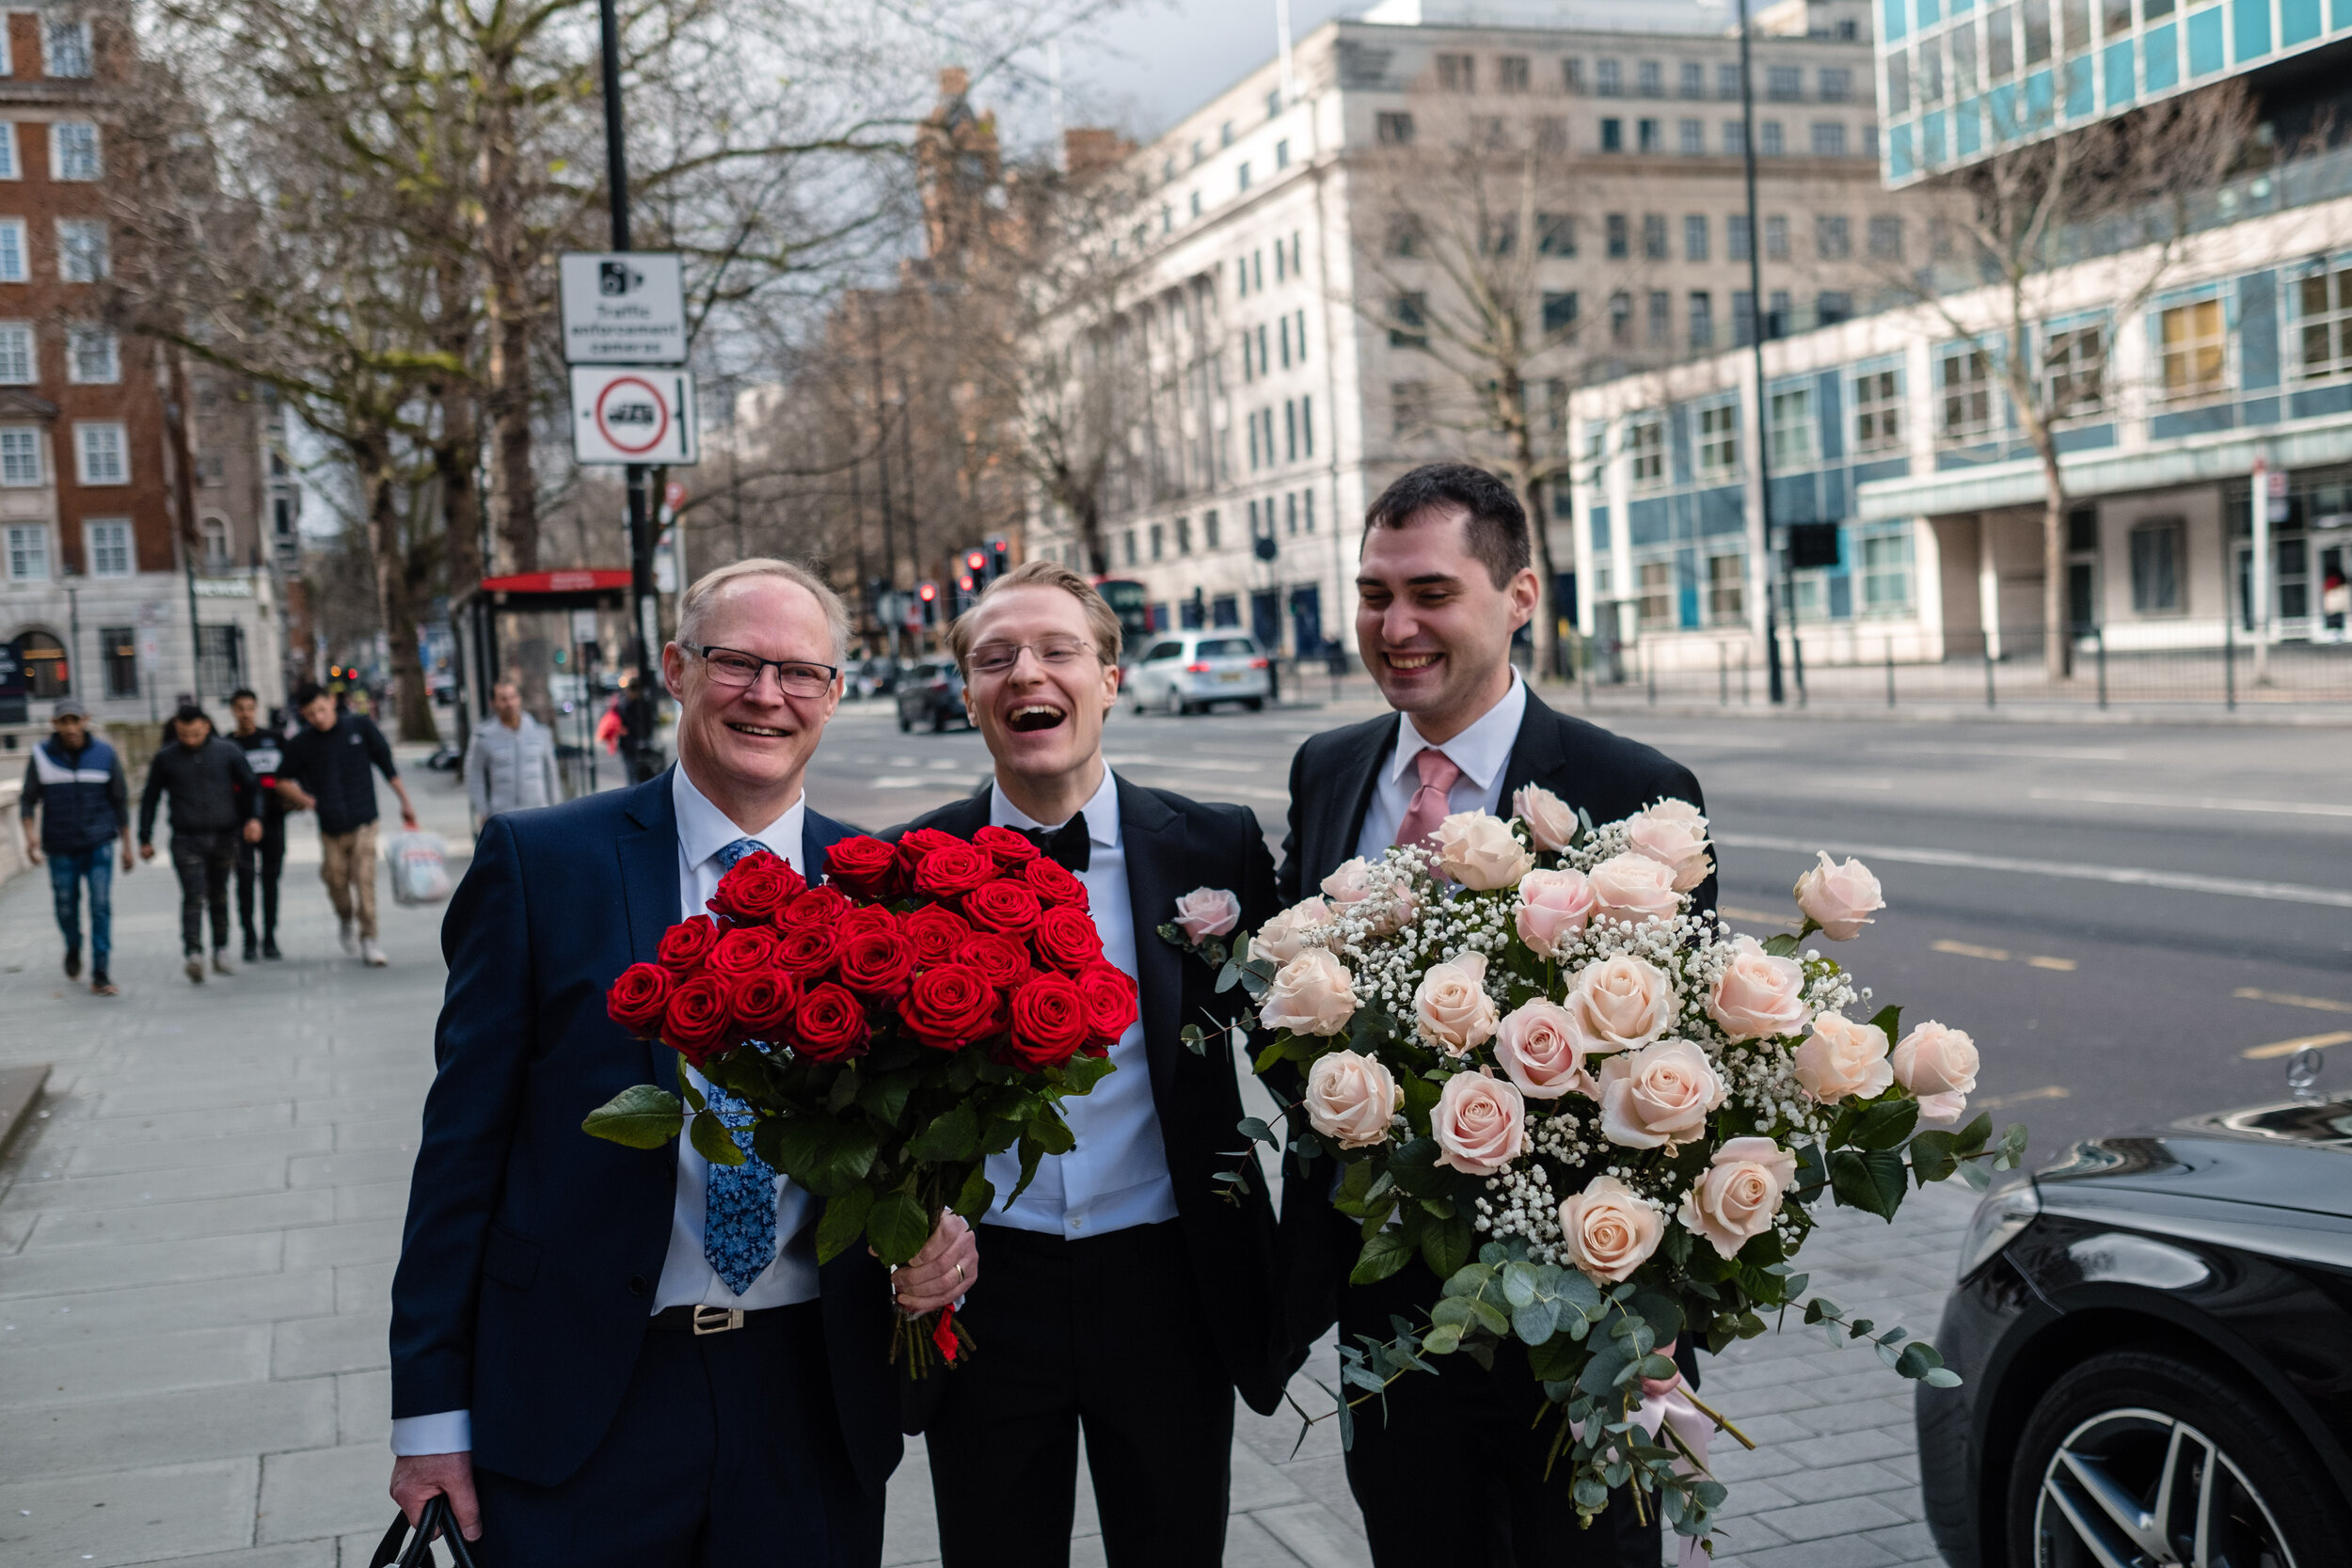 three male guests laughing and holding big bunches of roses